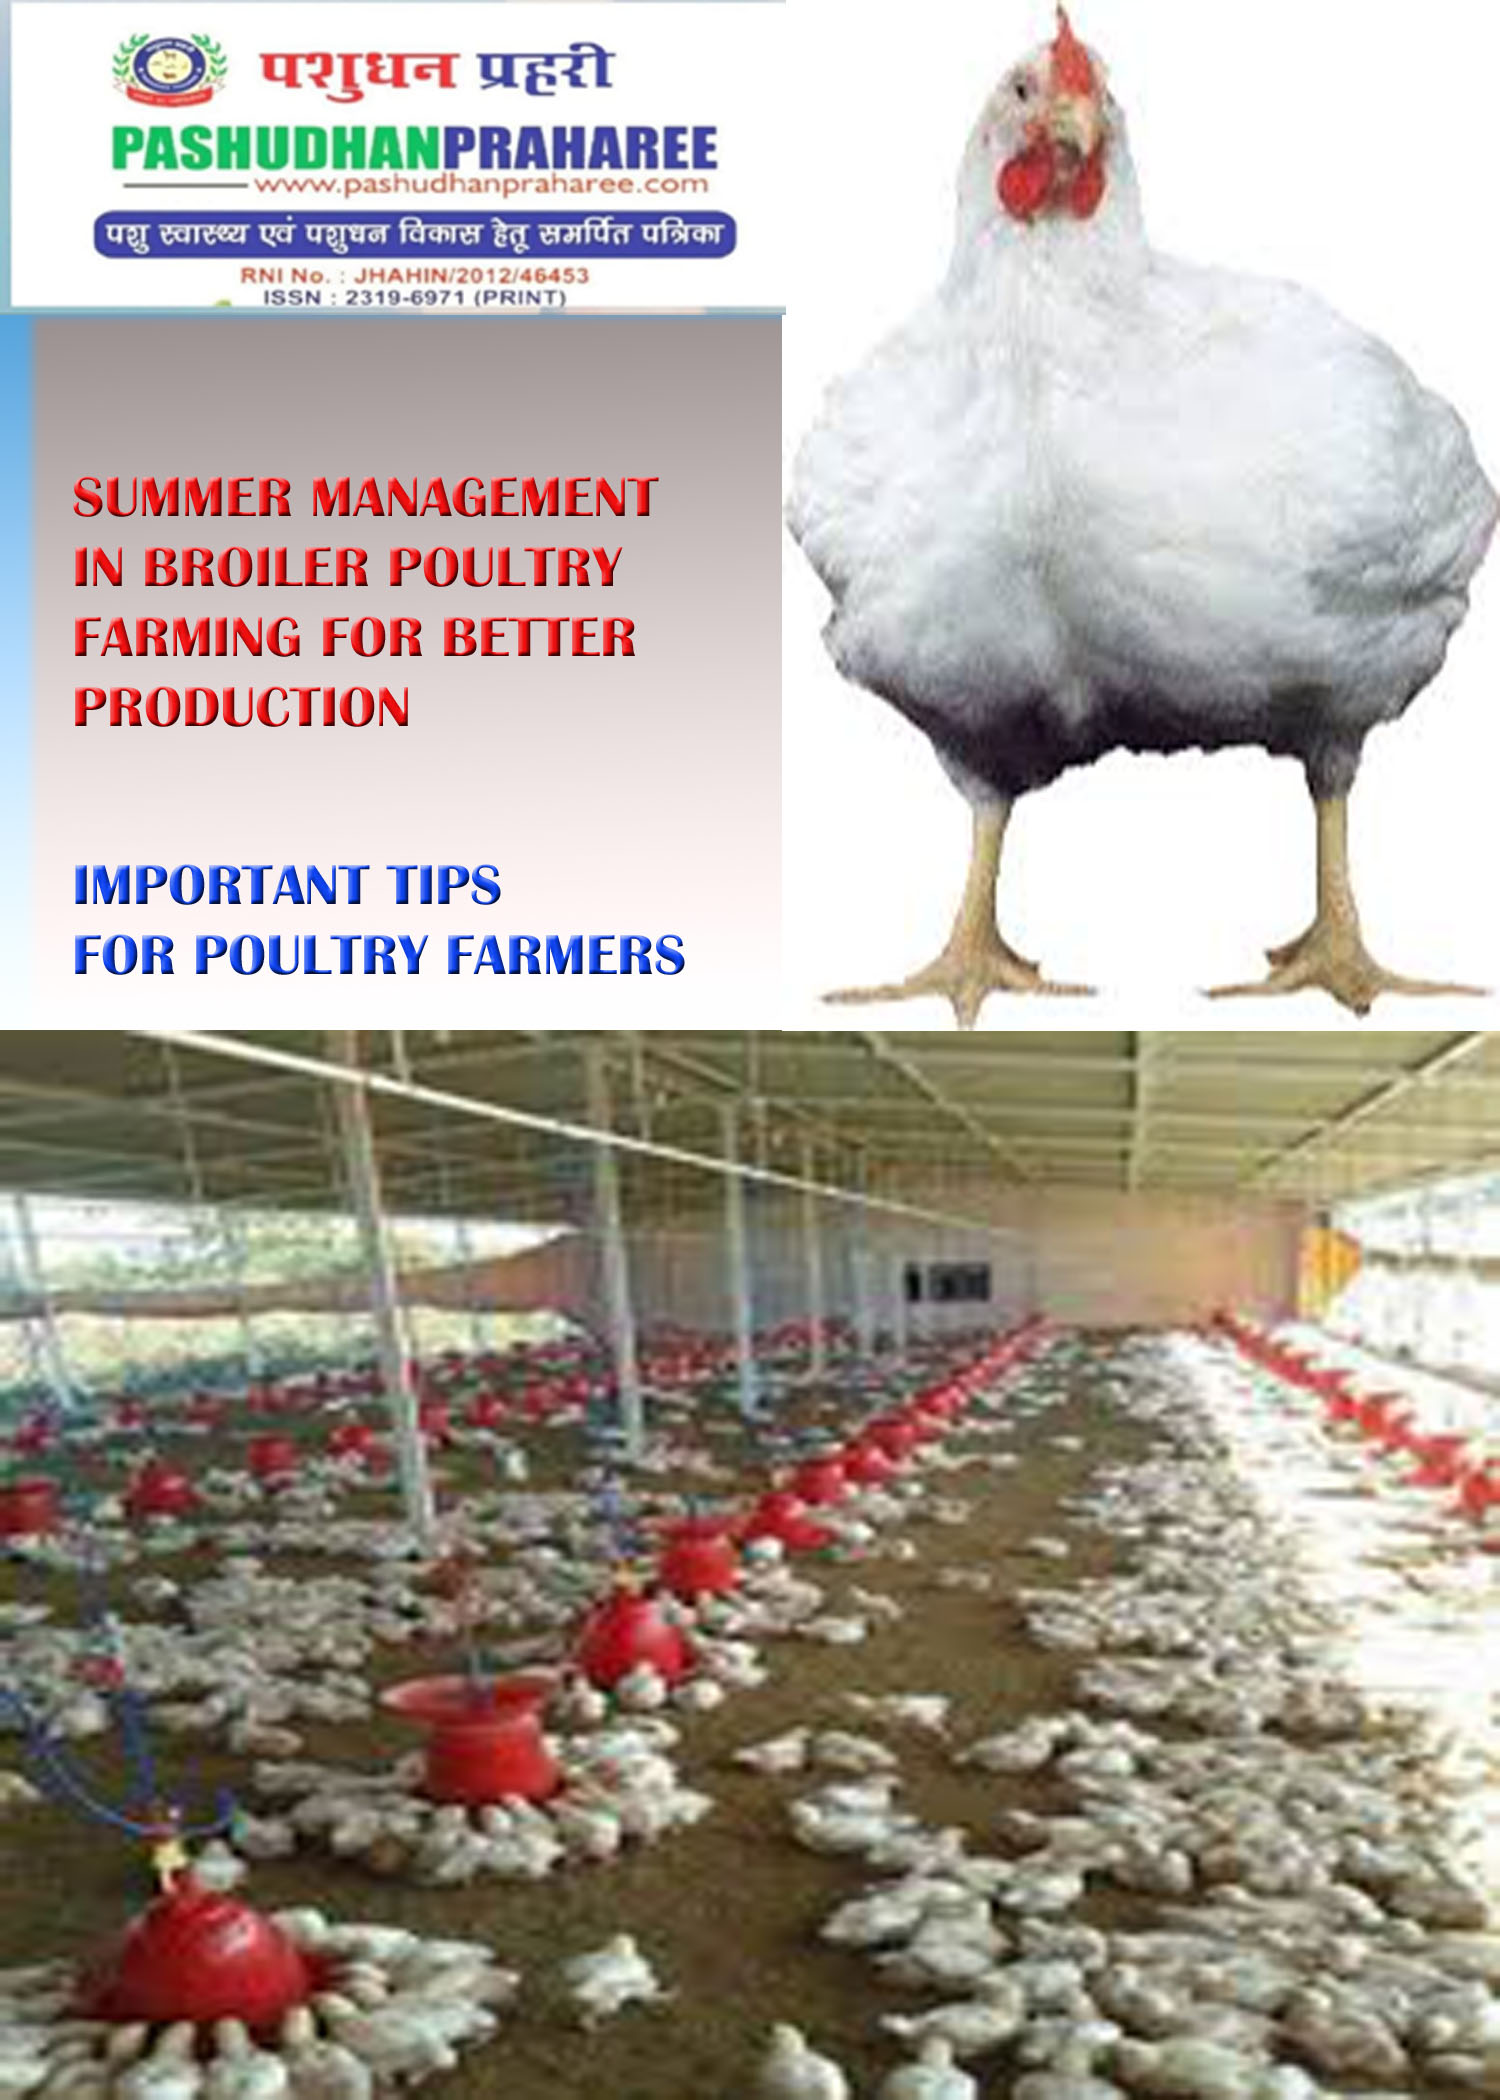 SUMMER MANAGEMENT IN BROILER POULTRY FARMING FOR BETTER PRODUCTIONopy 